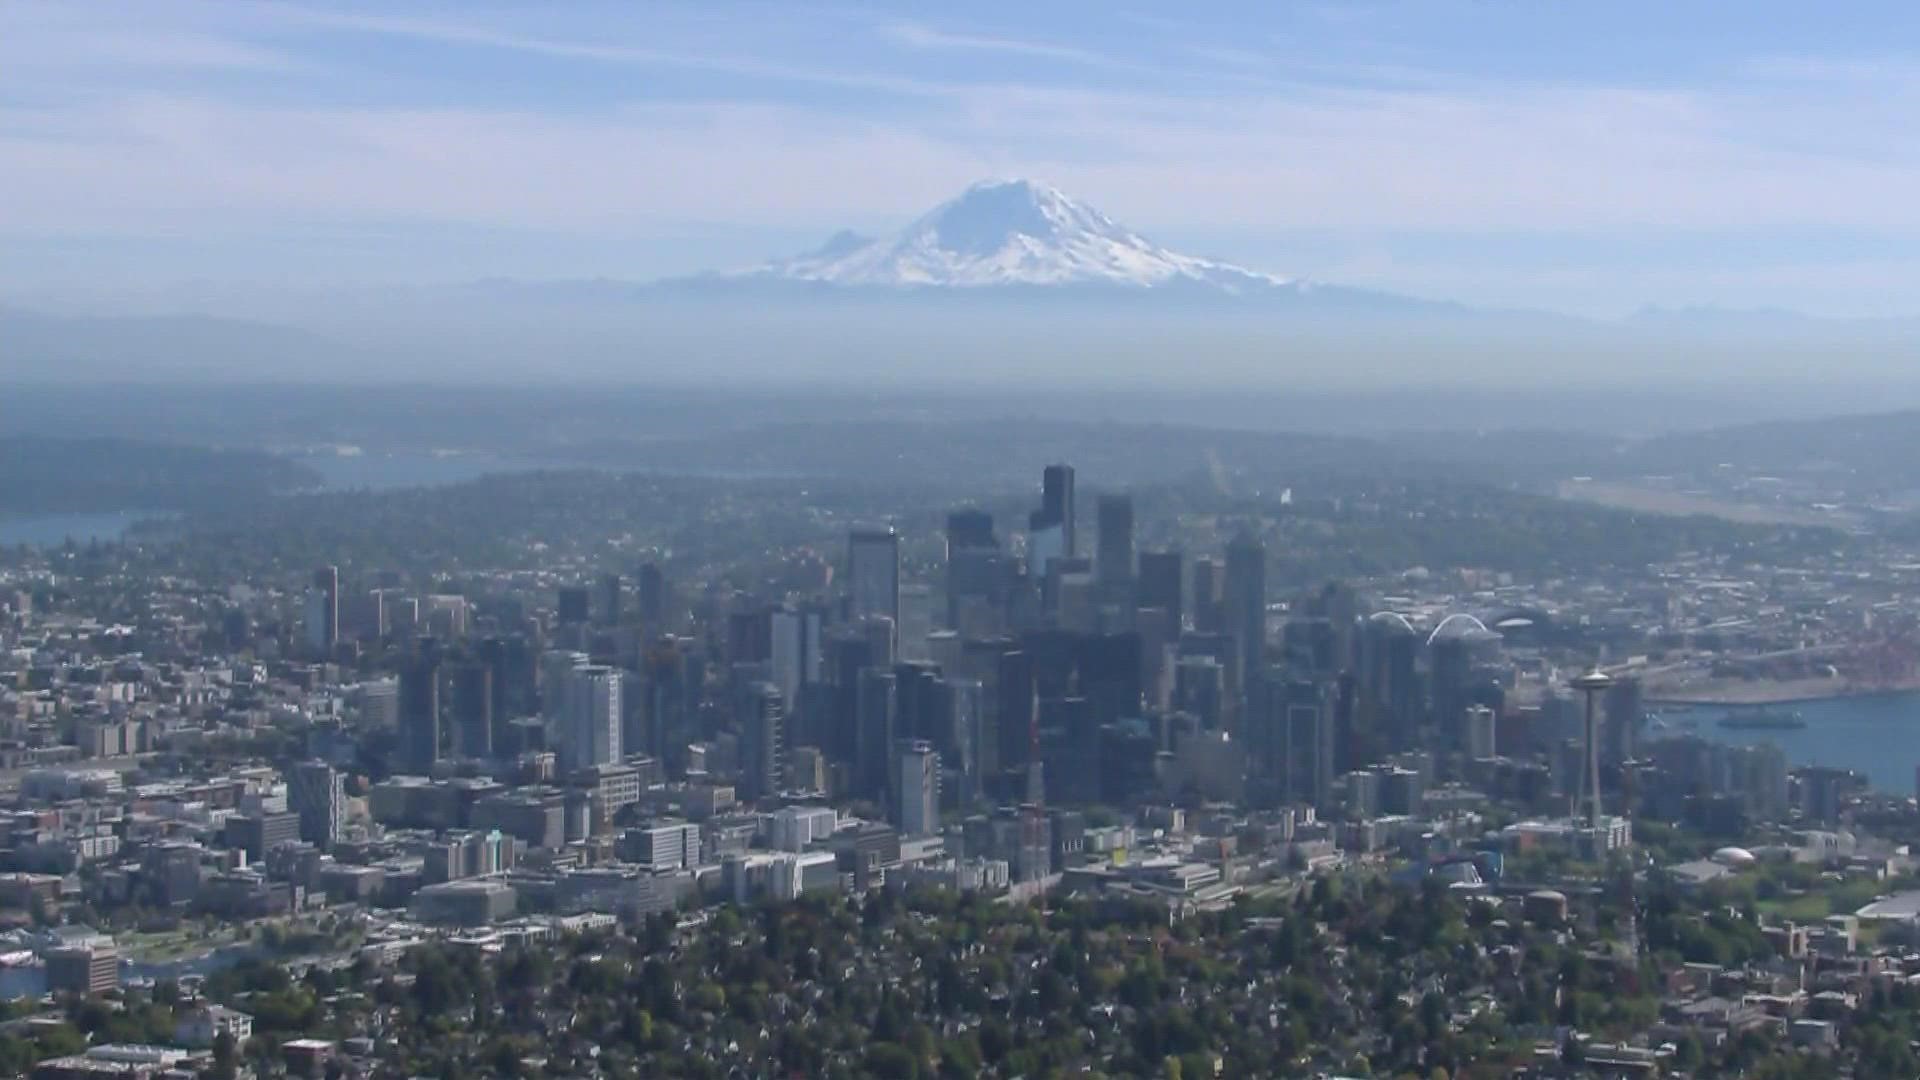 Gorgeous view of Seattle and Mount Rainier on the last day of Summer 2021 www.king5.com/weather